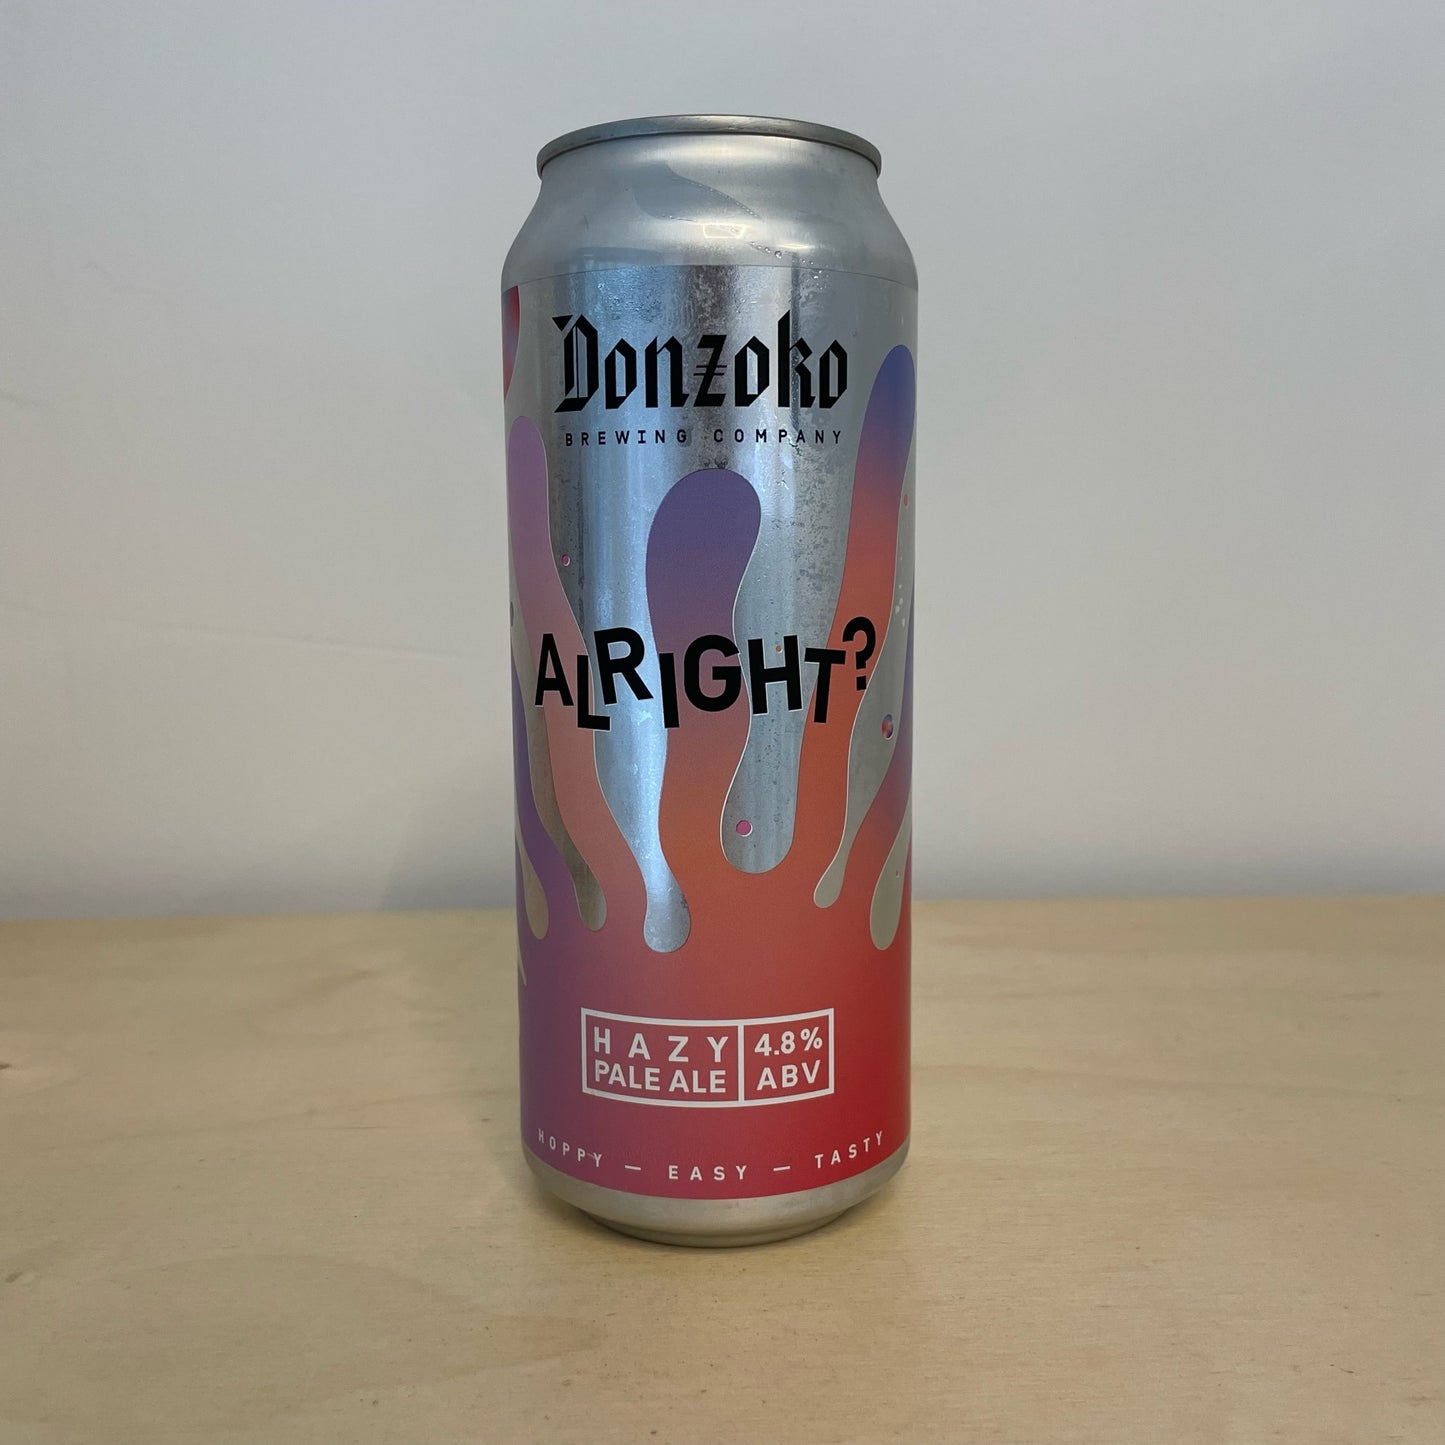 Donzoko Alright? (500ml Can)